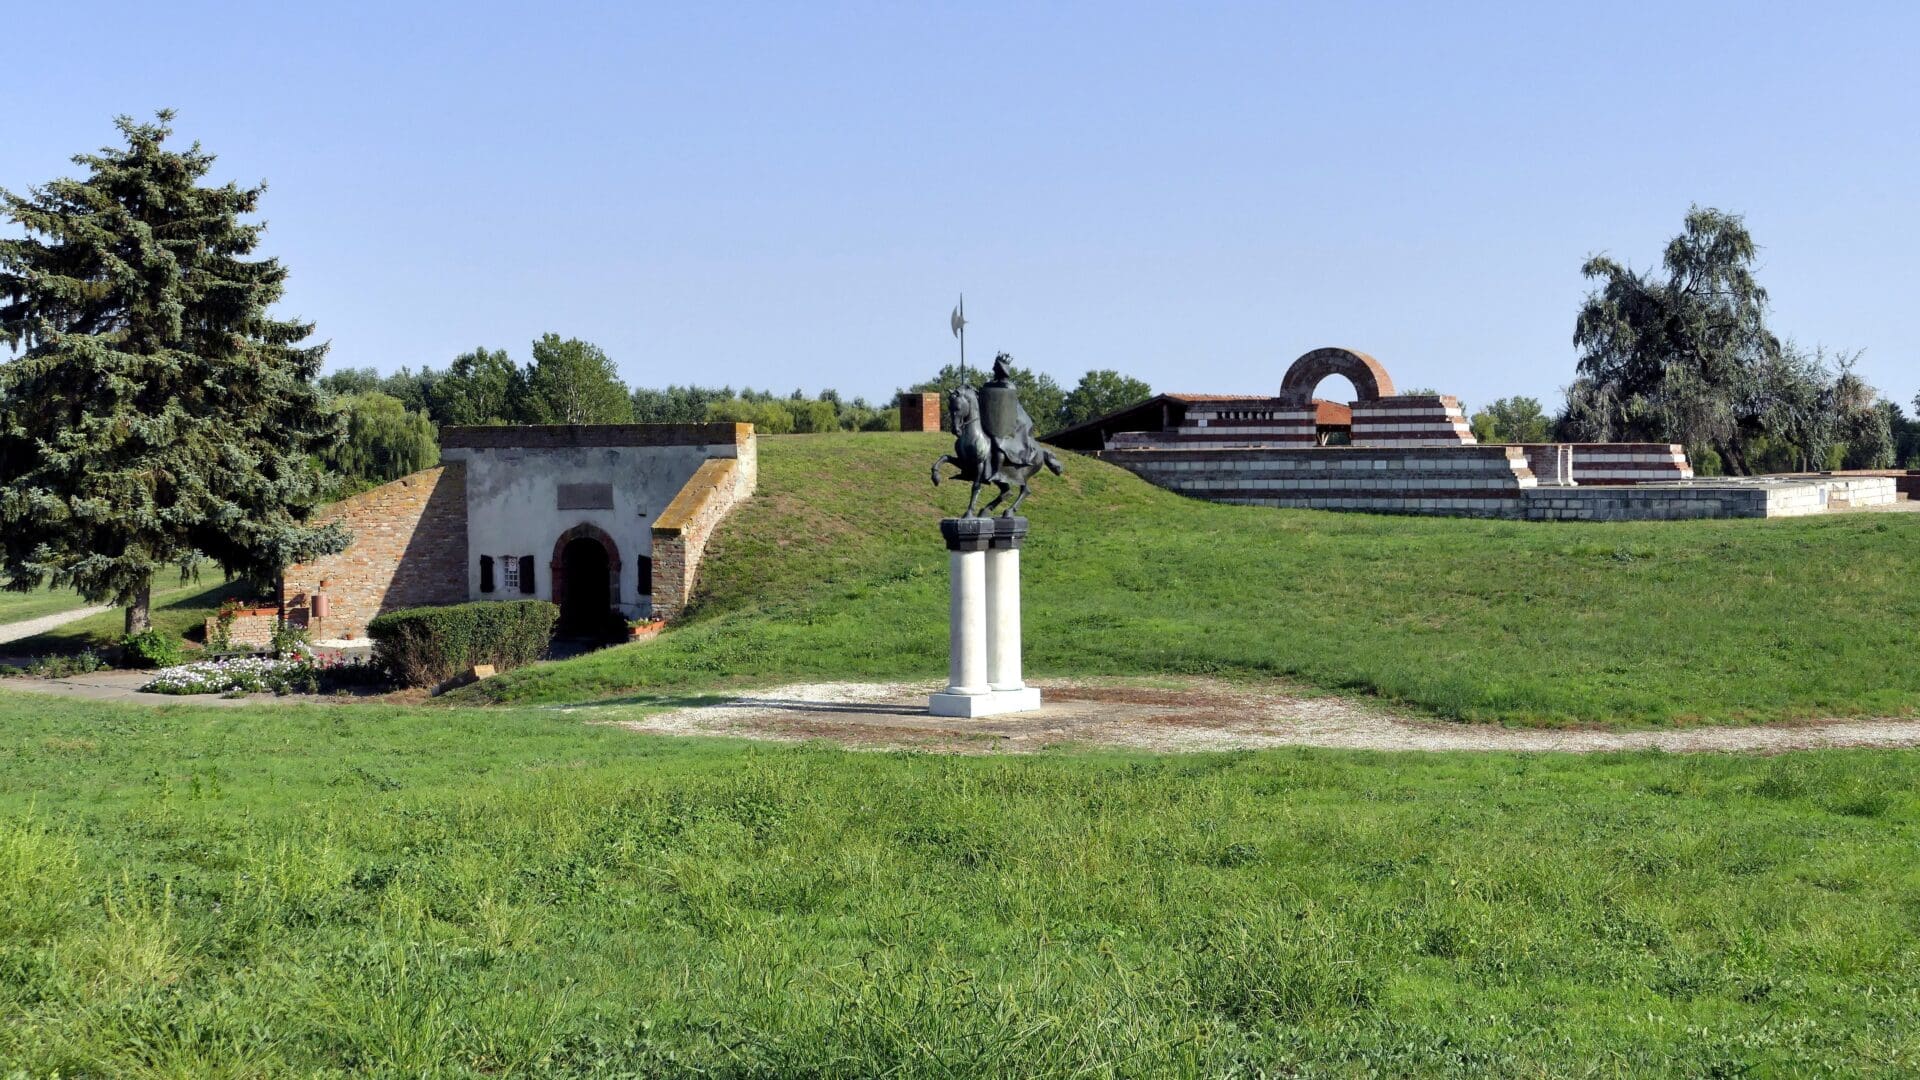 The entrance of the Vésztő-Mágor Historical Site and Museum in Békés County, established to showcase the history and the excavated remains of the ancient mounds discovered near the site.